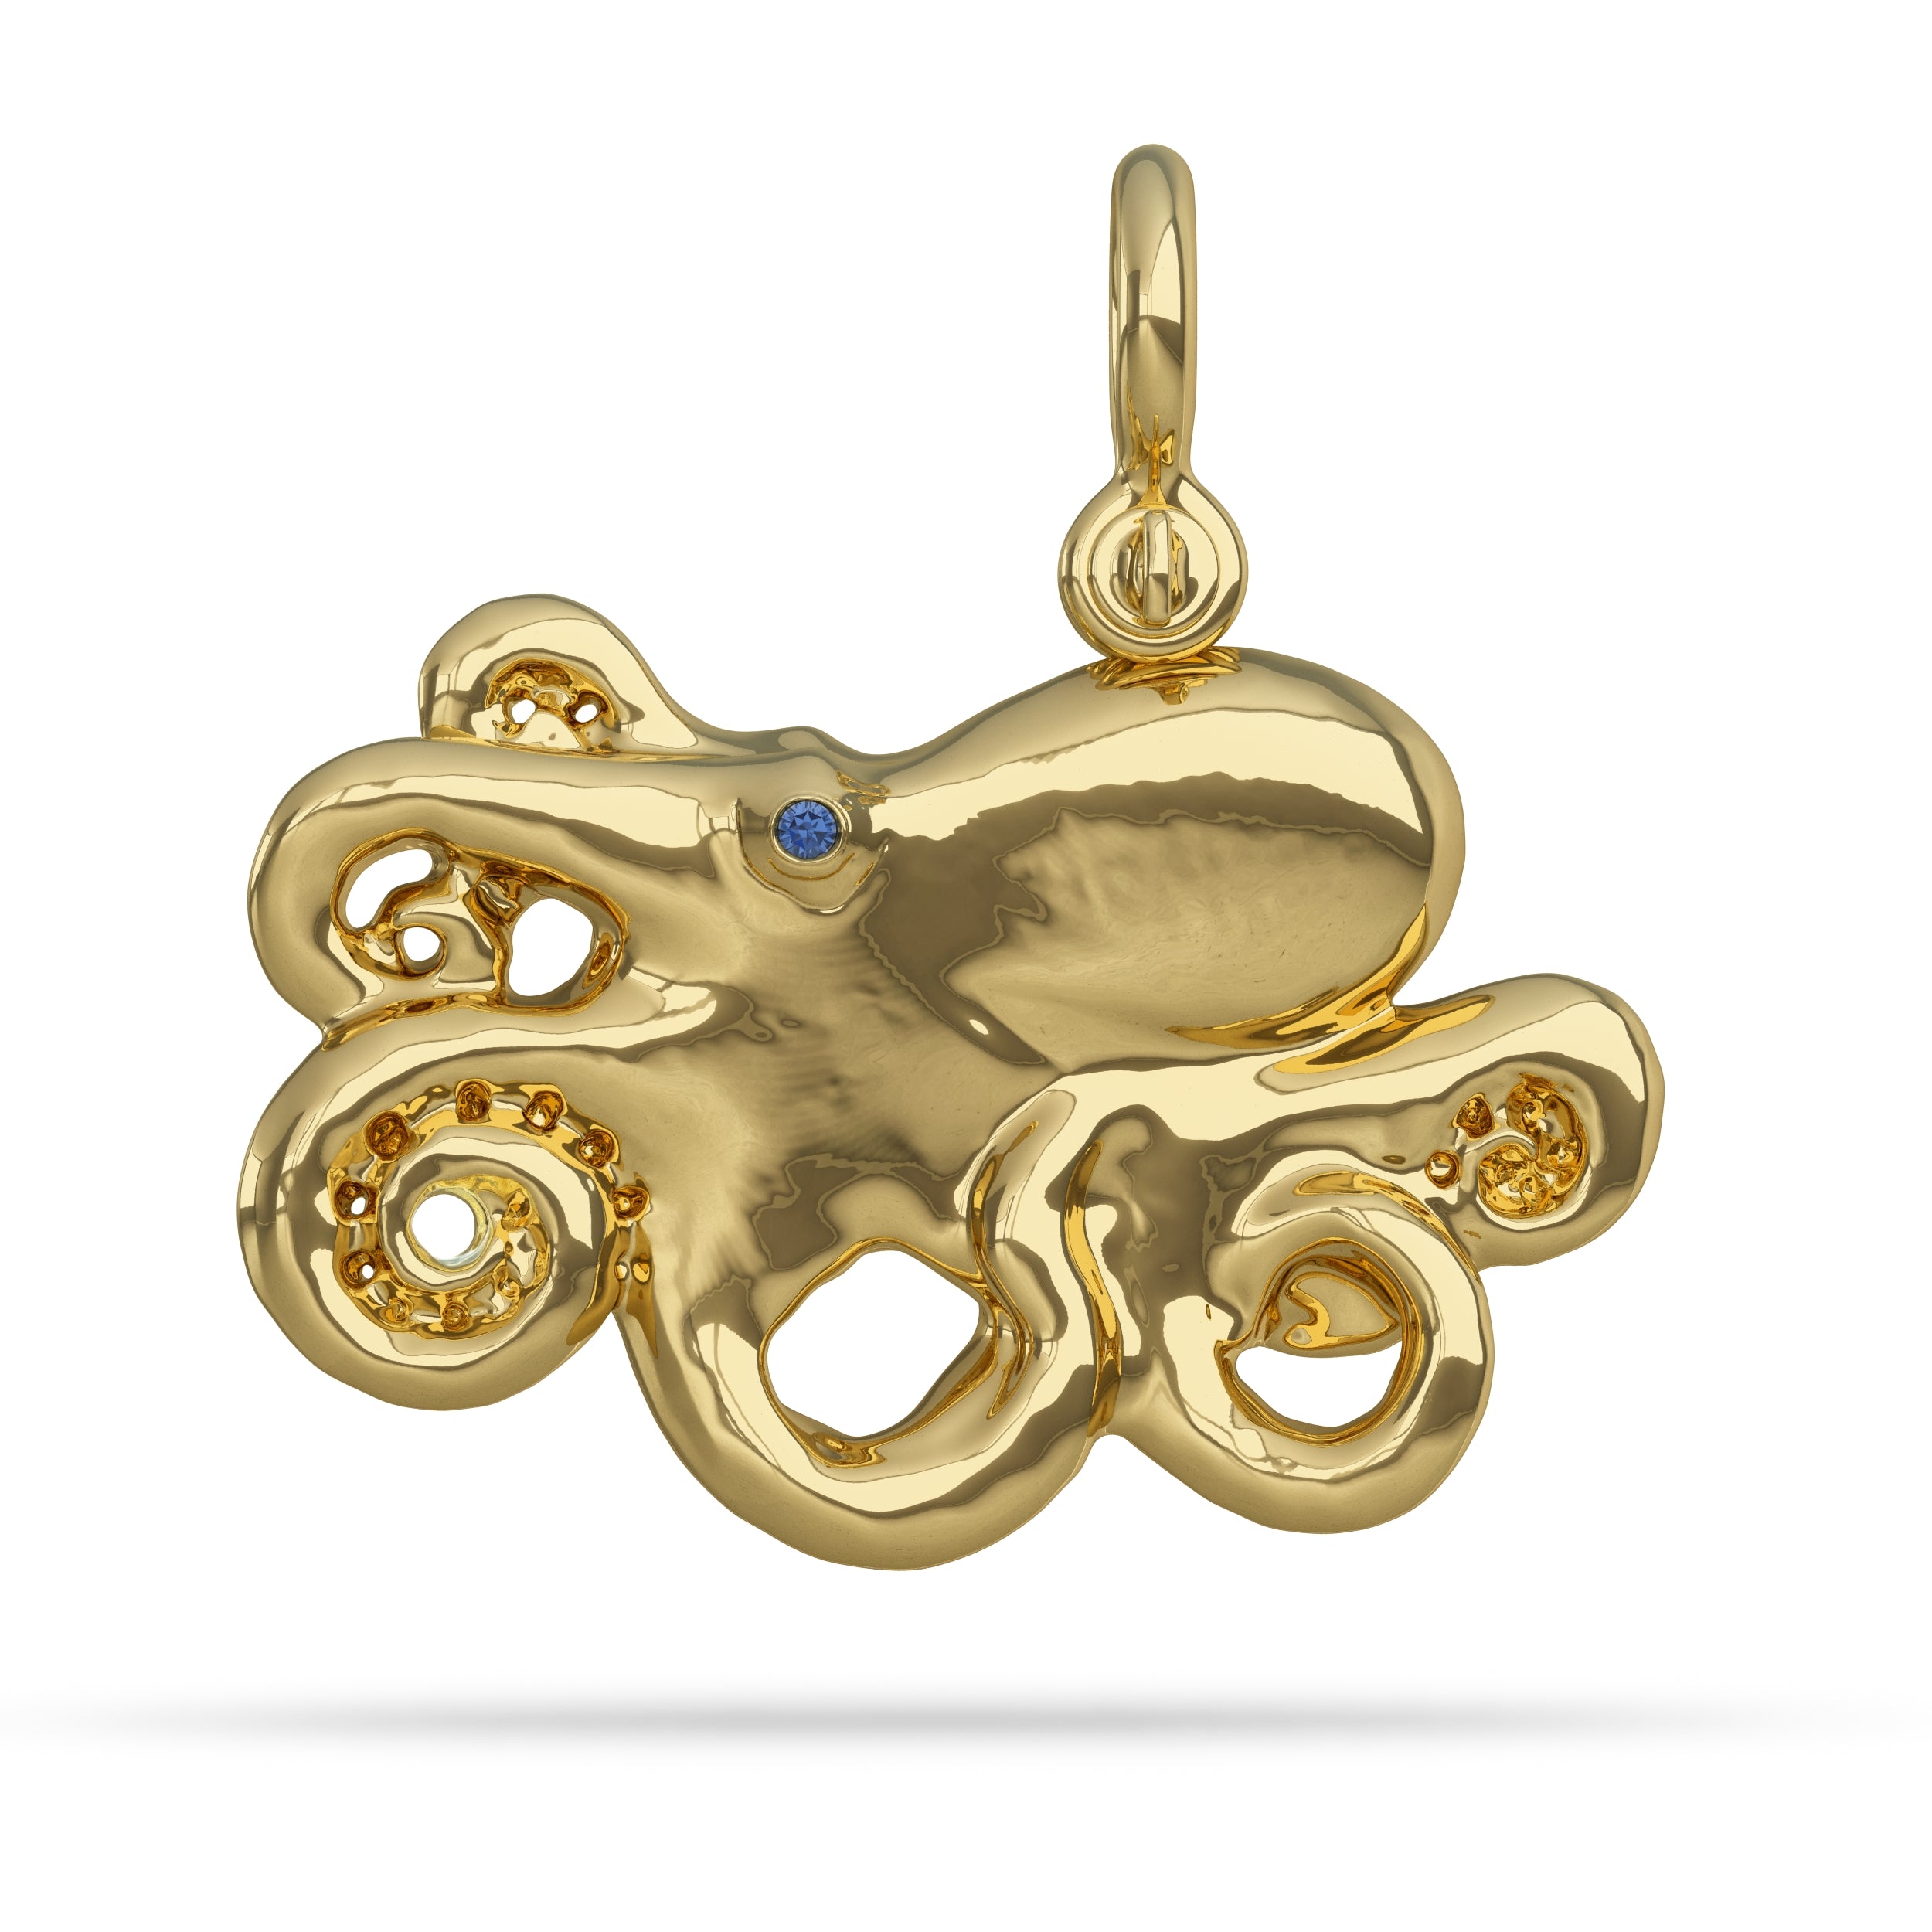 Solid 14k Gold Octopus Pendant High Polished Mirror Finished Hung by Nautical Shackle Bail Custom Designed By Nautical Treasure Jewelry In The Florida Keys for My Teacher